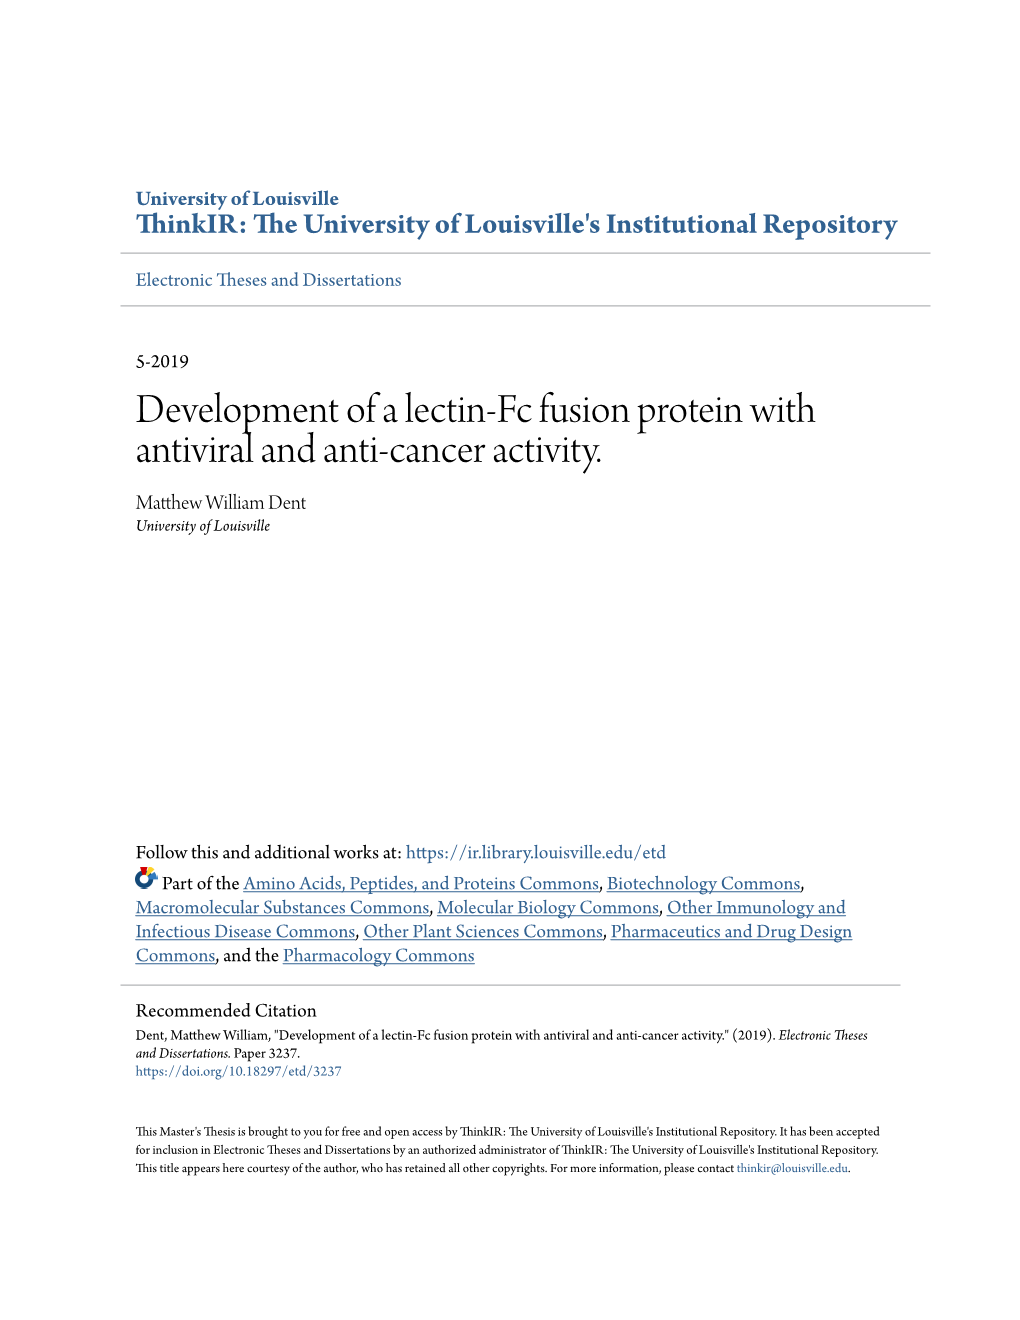 Development of a Lectin-Fc Fusion Protein with Antiviral and Anti-Cancer Activity